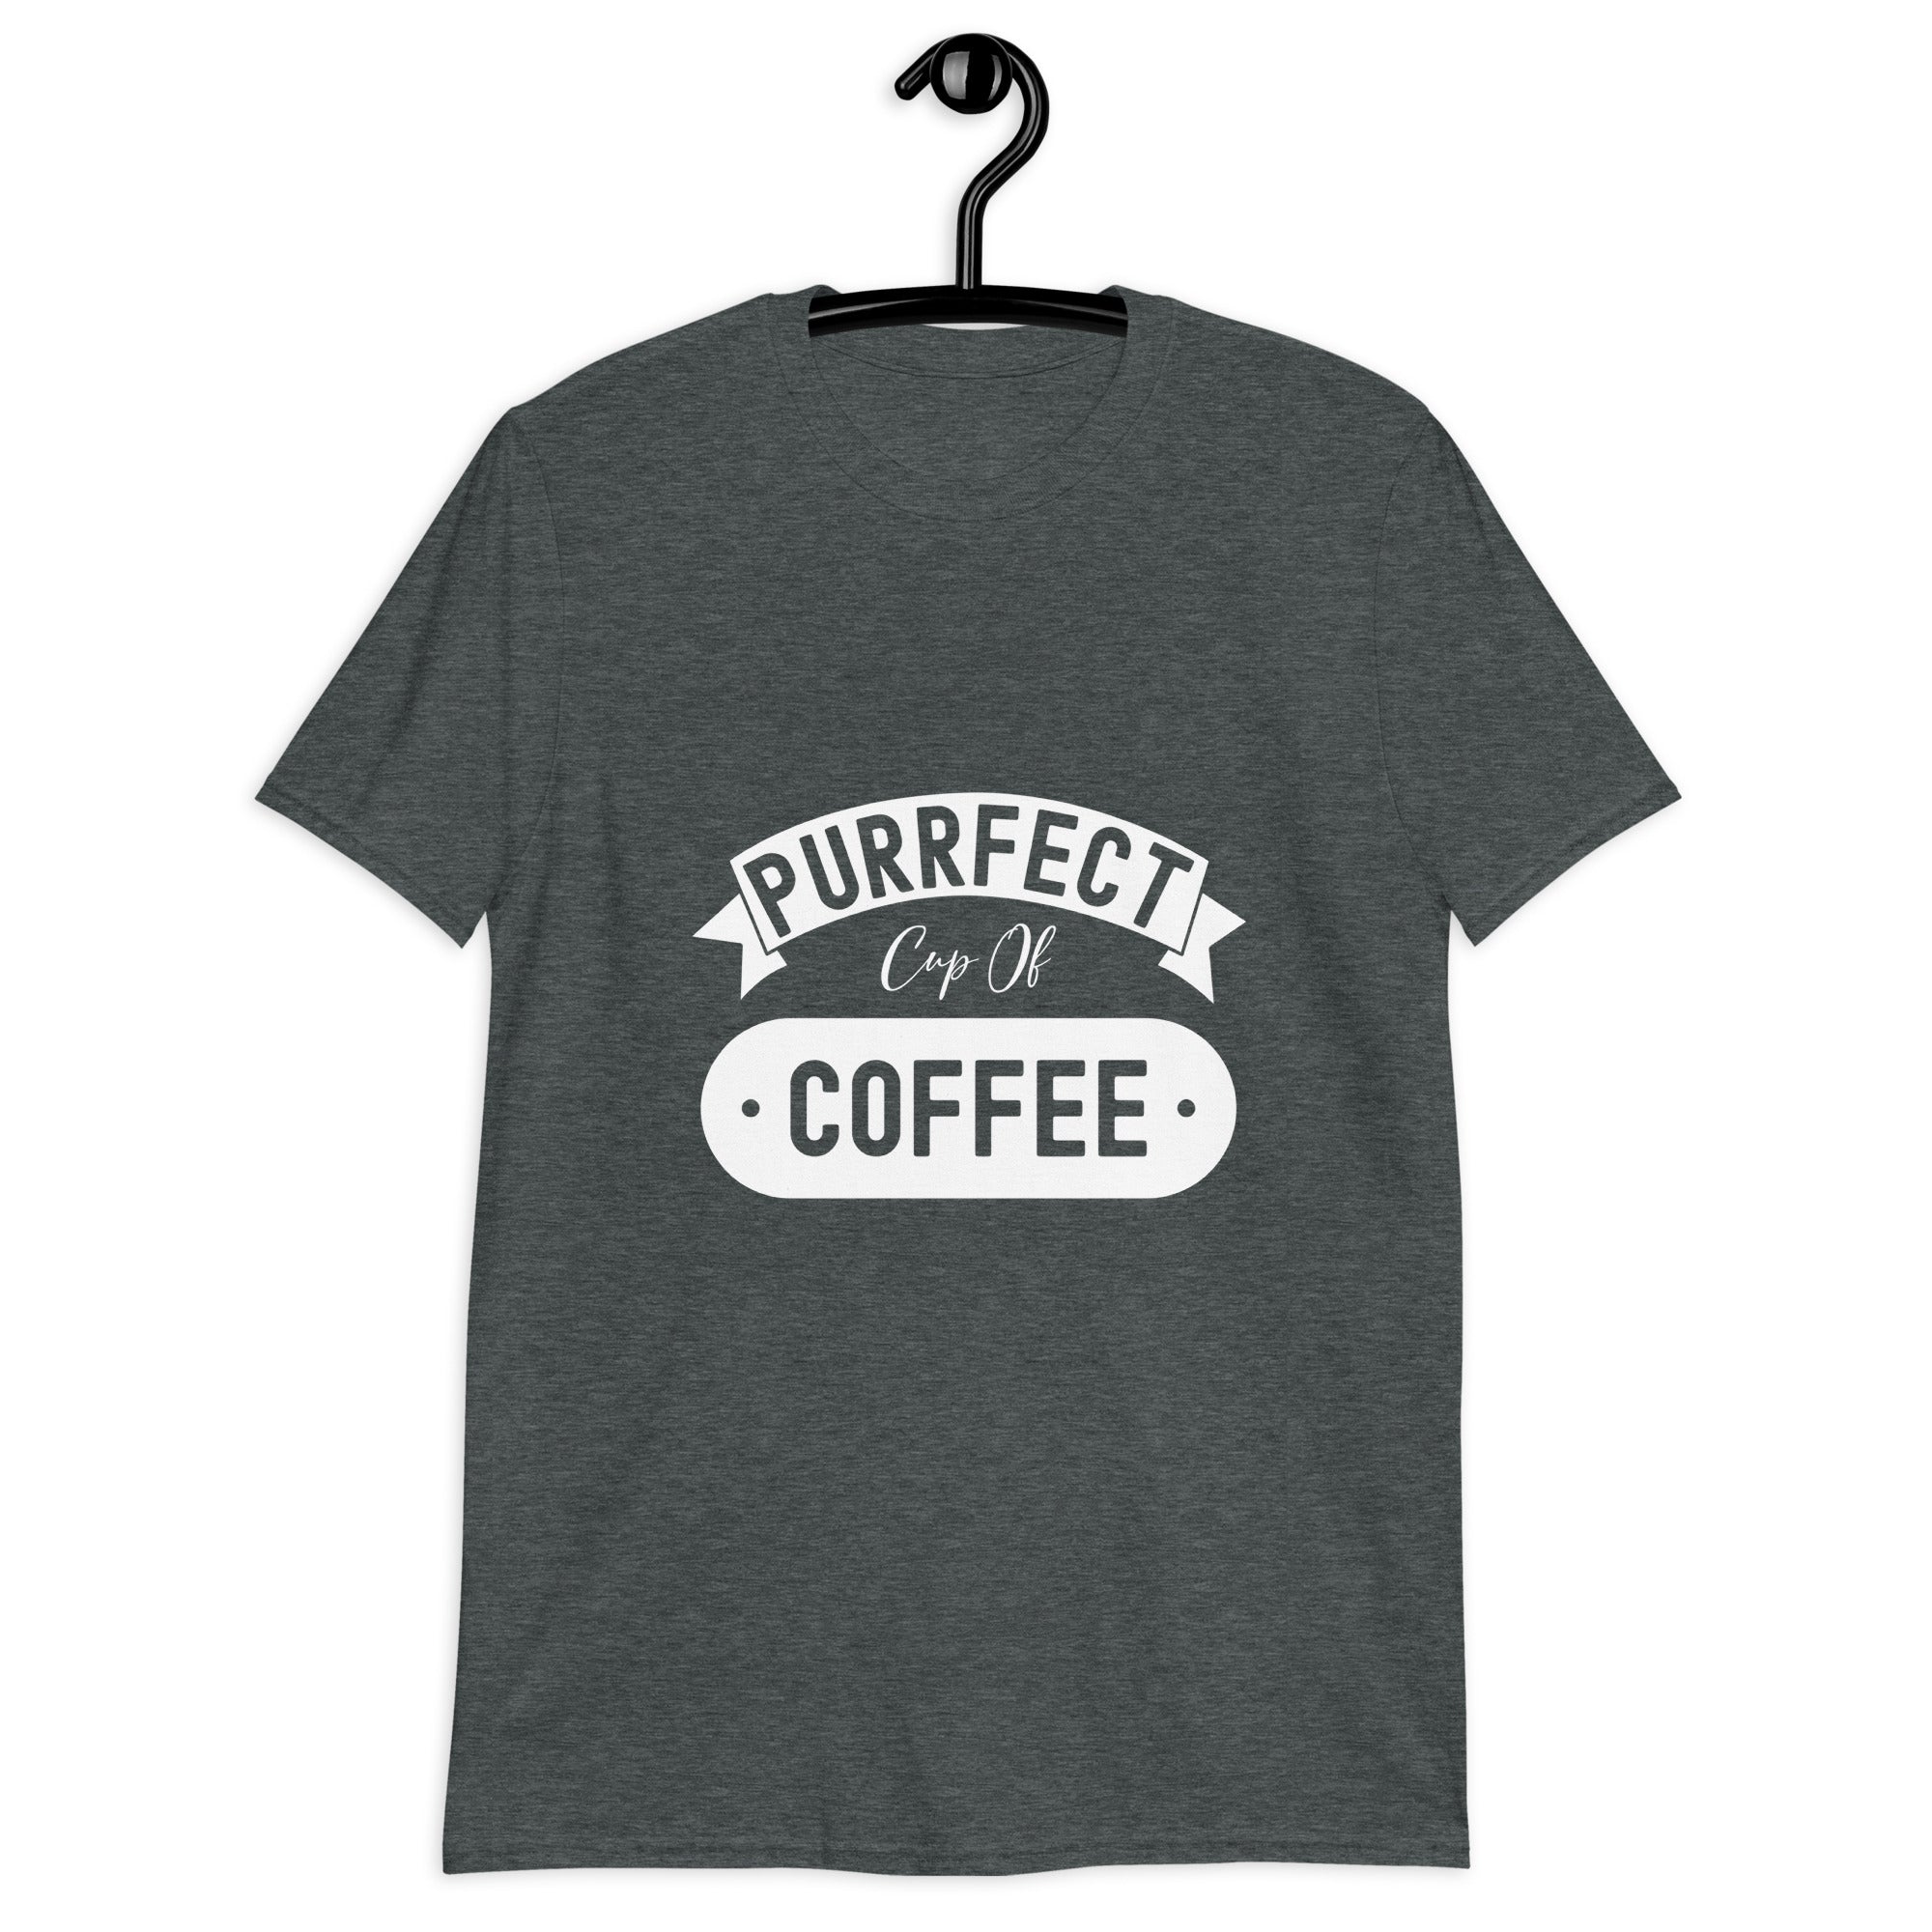 Short-Sleeve Unisex T-Shirt | Purrfect cup of coffee